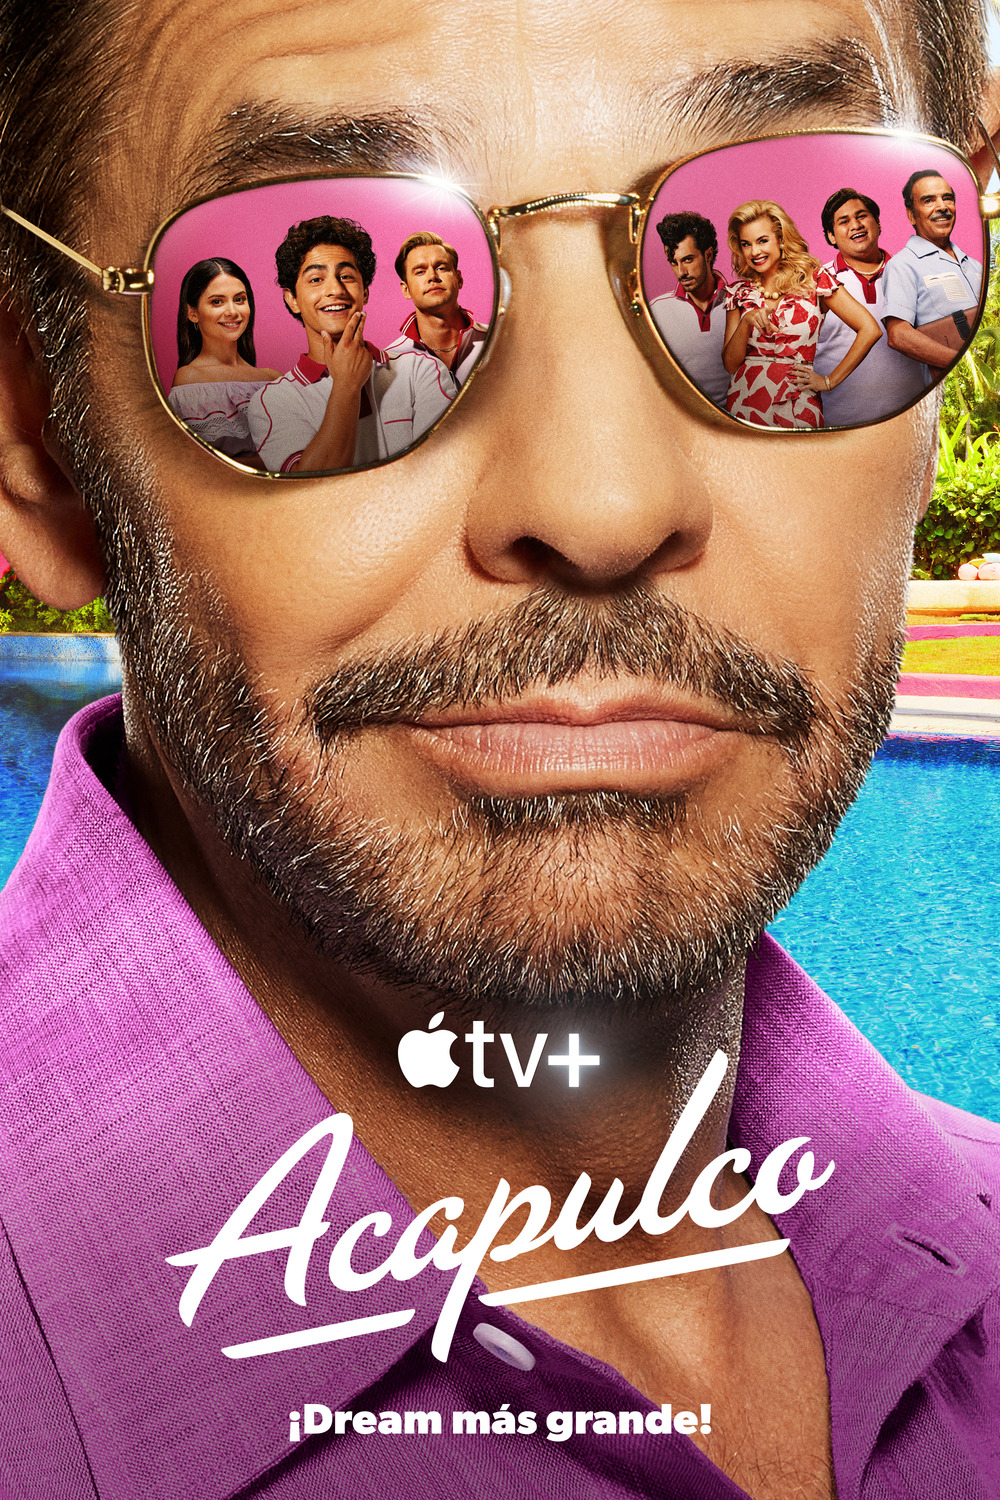 Extra Large TV Poster Image for Acapulco (#2 of 3)